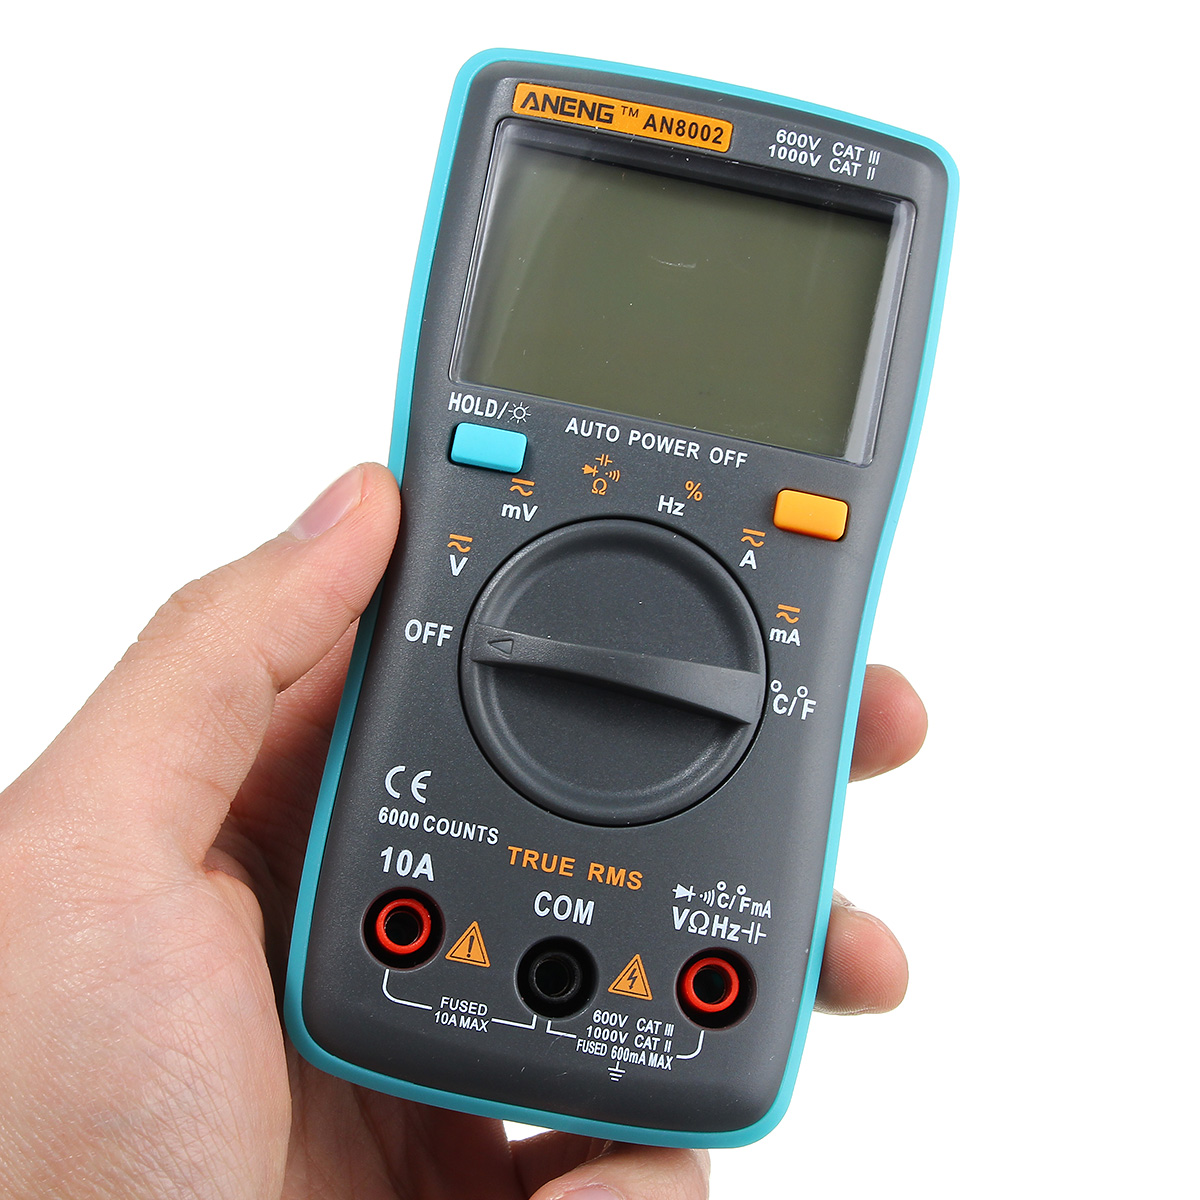 ANENG AN8002 Digital True RMS 6000 Counts Multimeter AC/DC Current Voltage Frequency Resistance Temperature Tester ℃/℉ 147